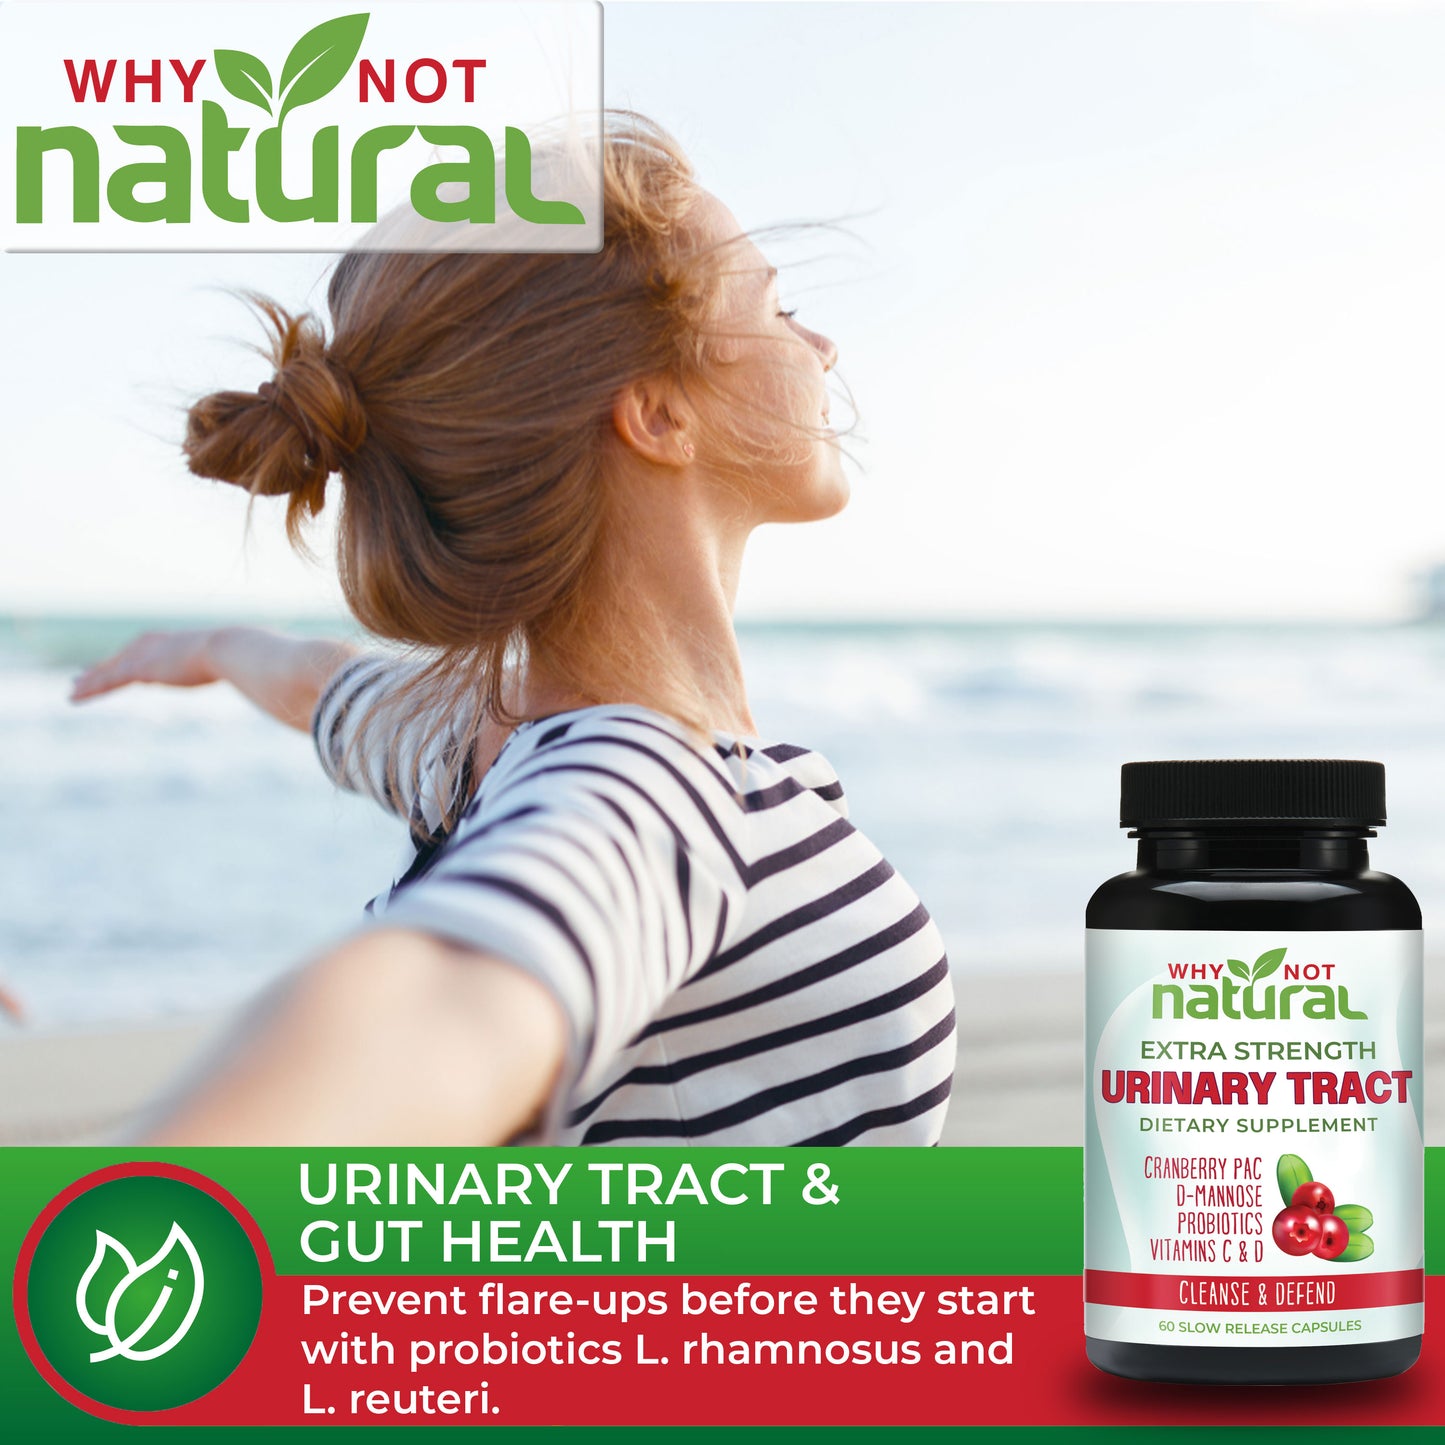 6-in-1 UTI Capsules with D Mannose, Cranberry PAC Extract, Probiotics and Vitamin C & D